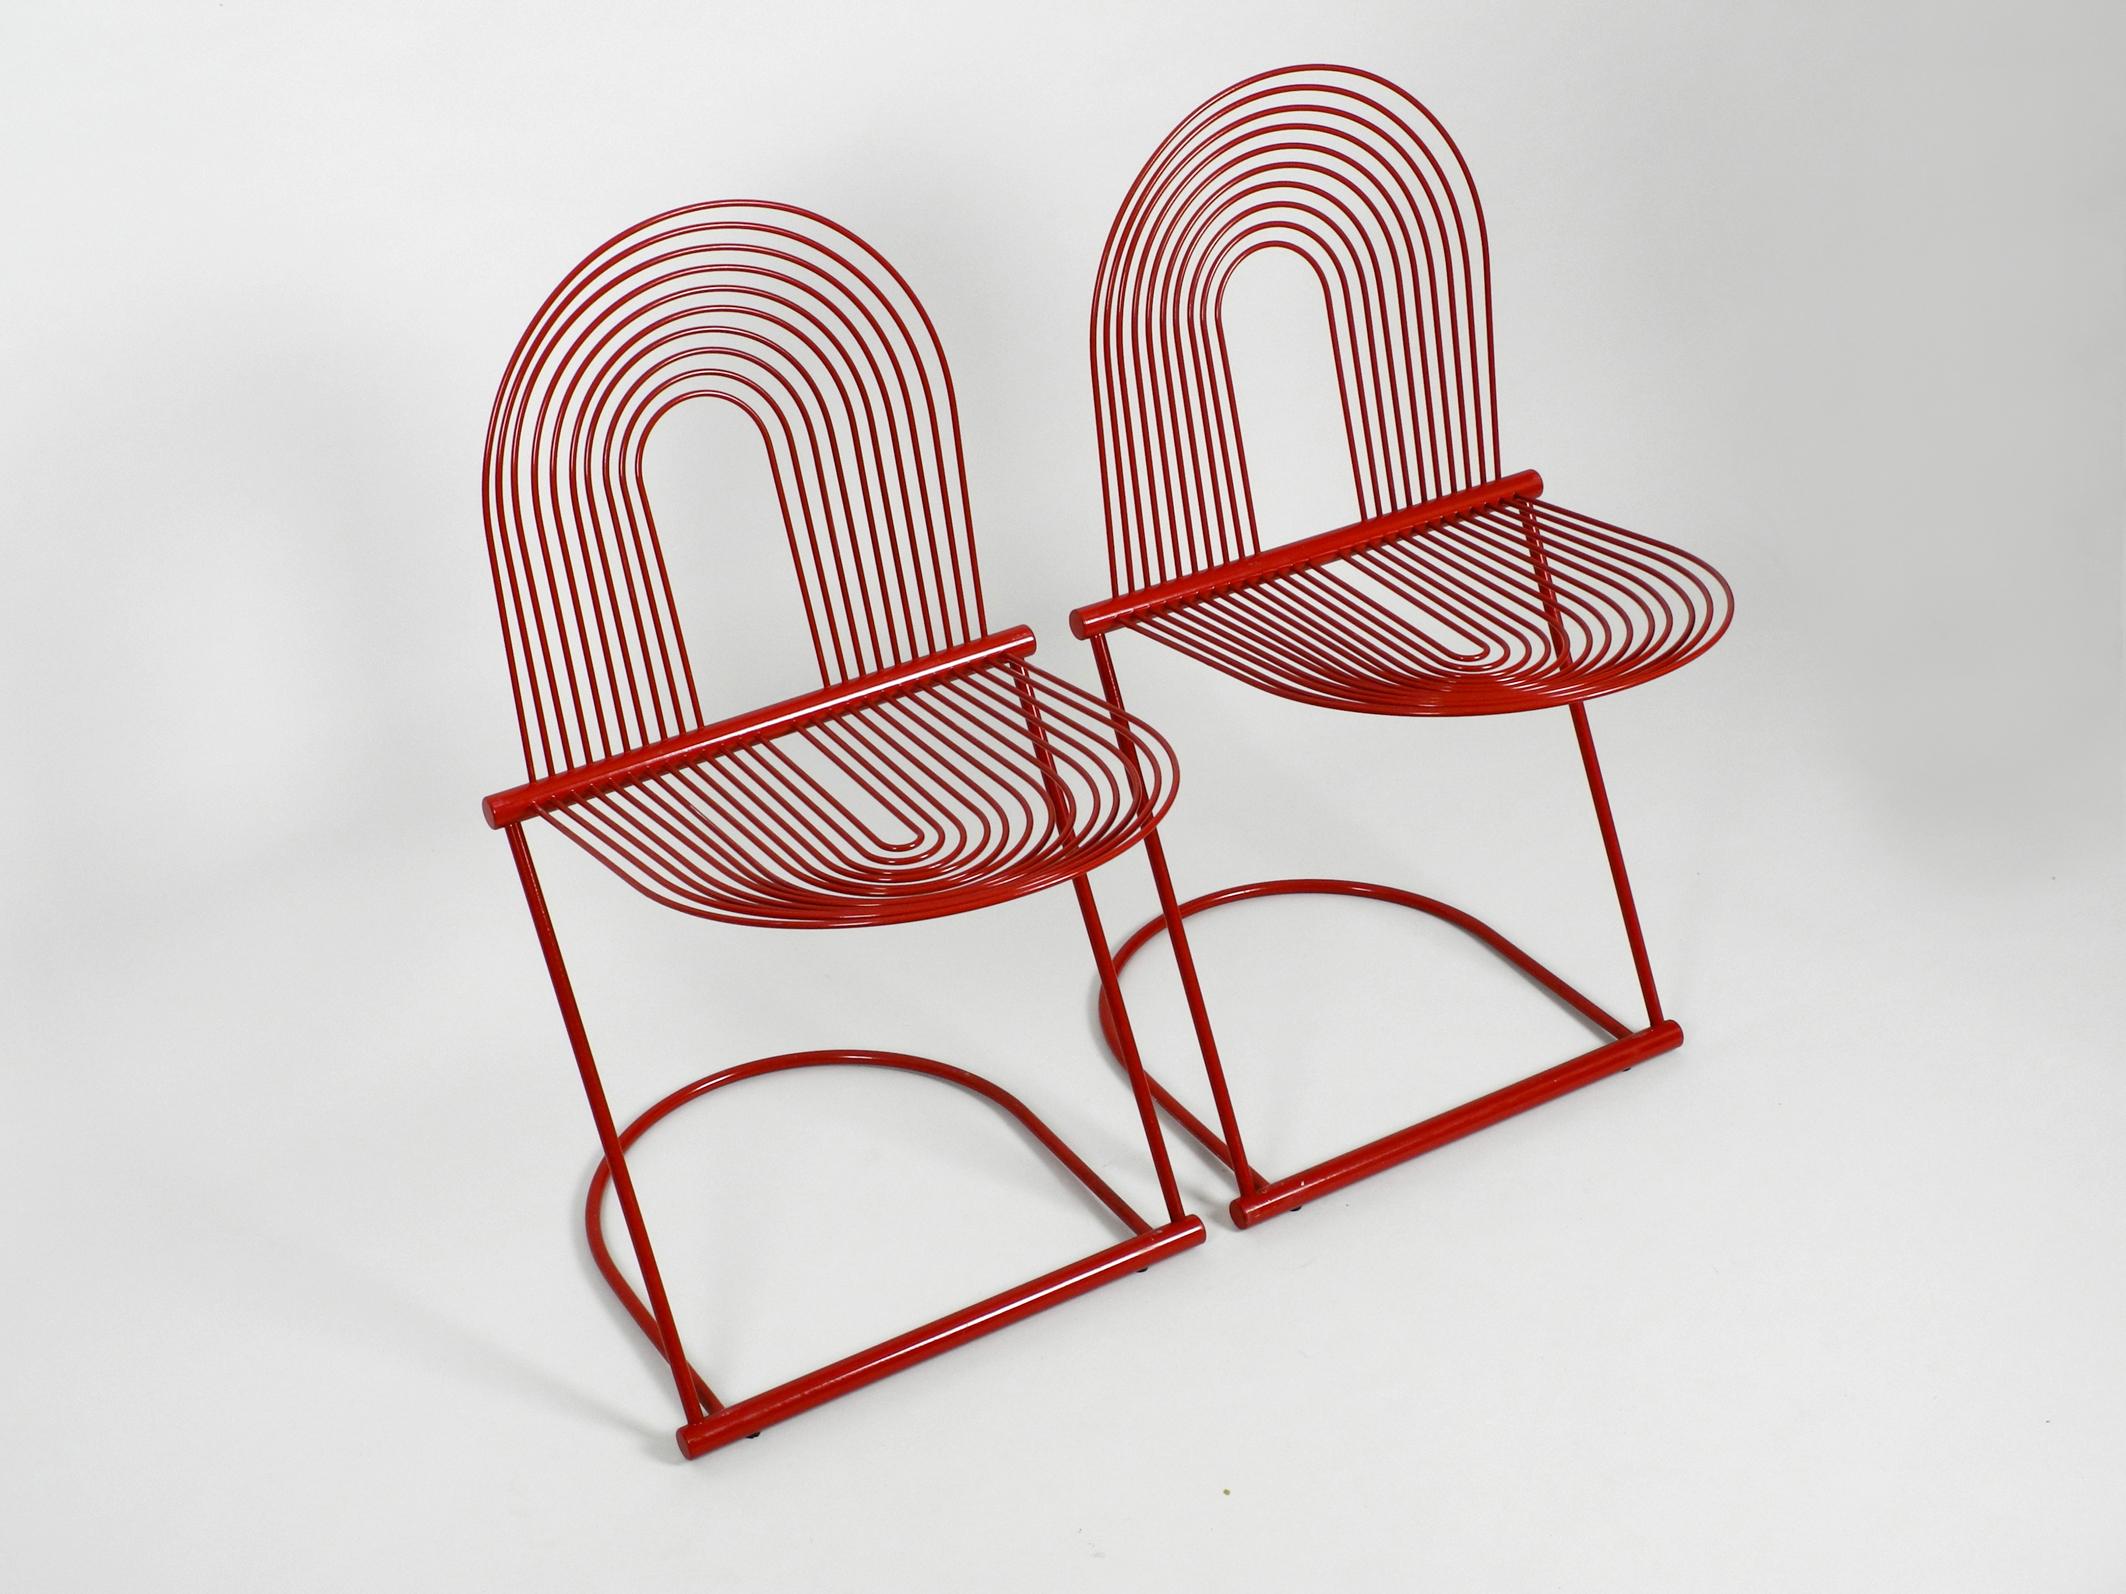 German Pair of Rare Swing Chairs Jutta and Herbert Ohl for Rosenthal Studio Linie, 1982